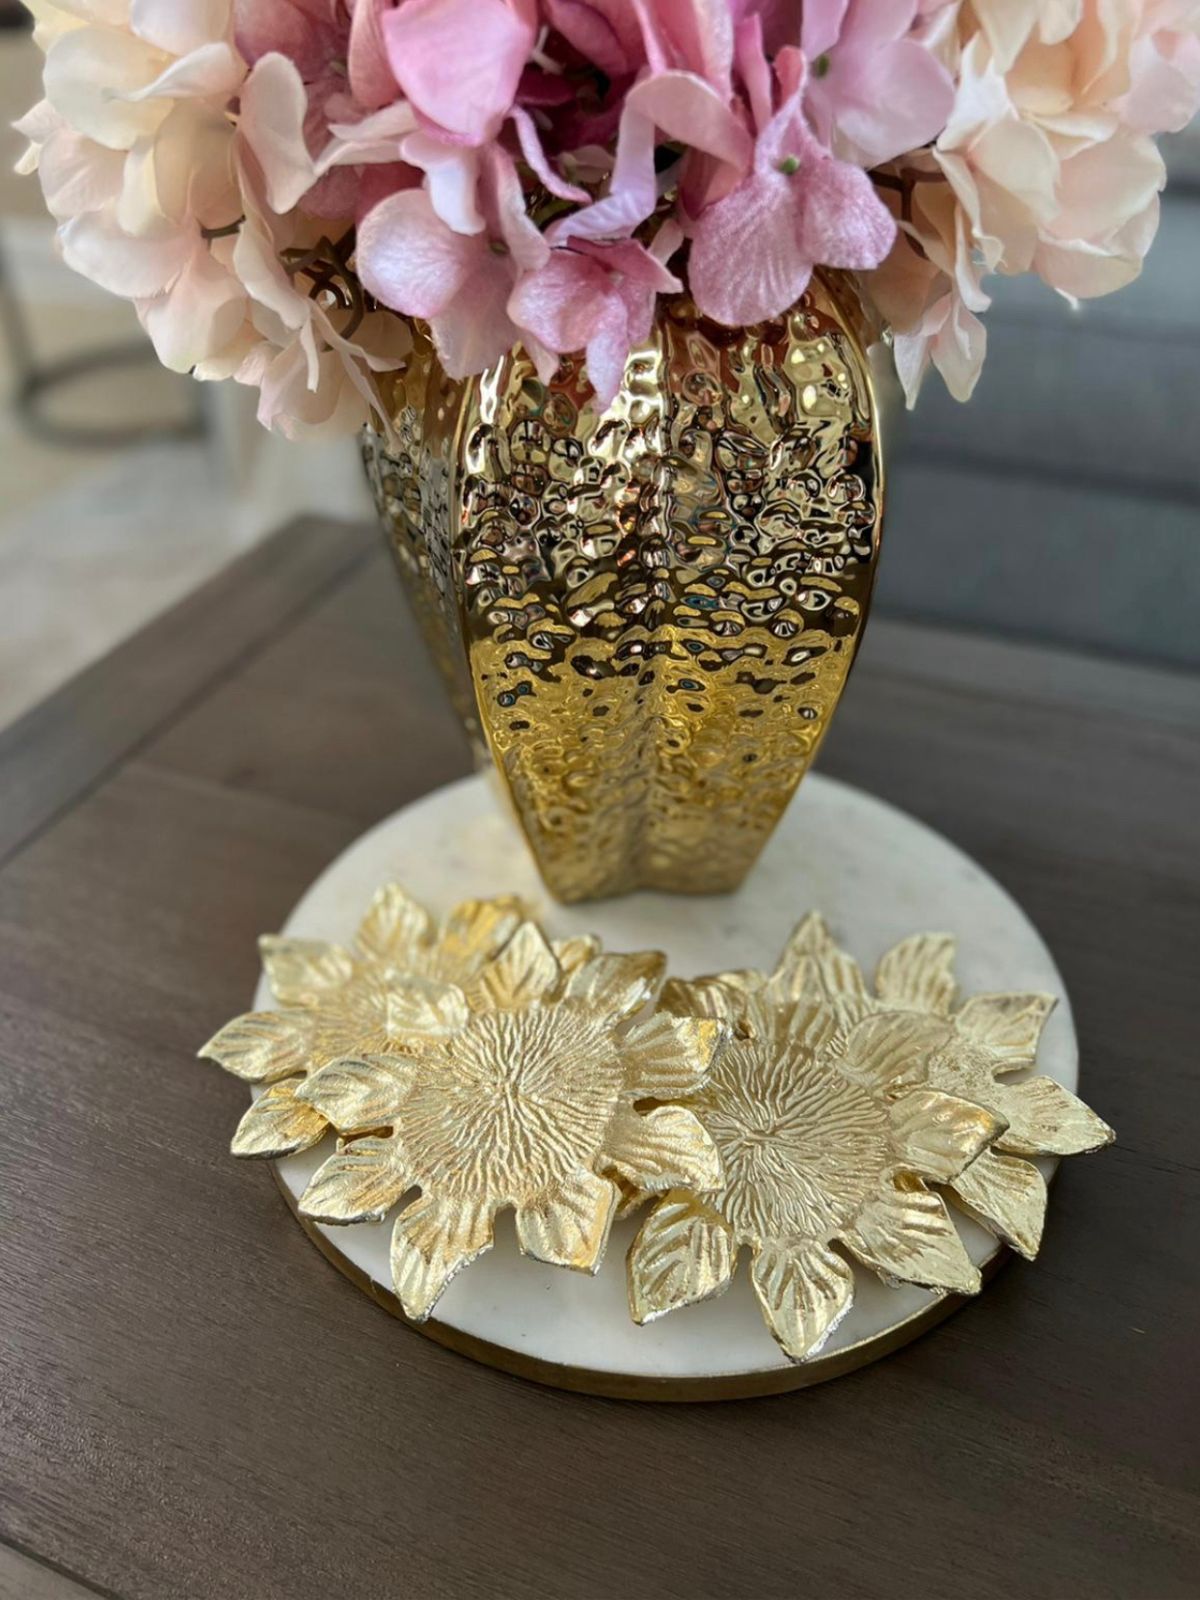 This stunning set of 4 coasters could be used as spoons rests or candle holders. They are the perfect gift for anyone you love. However way you use them, these coasters are going to make a statement!